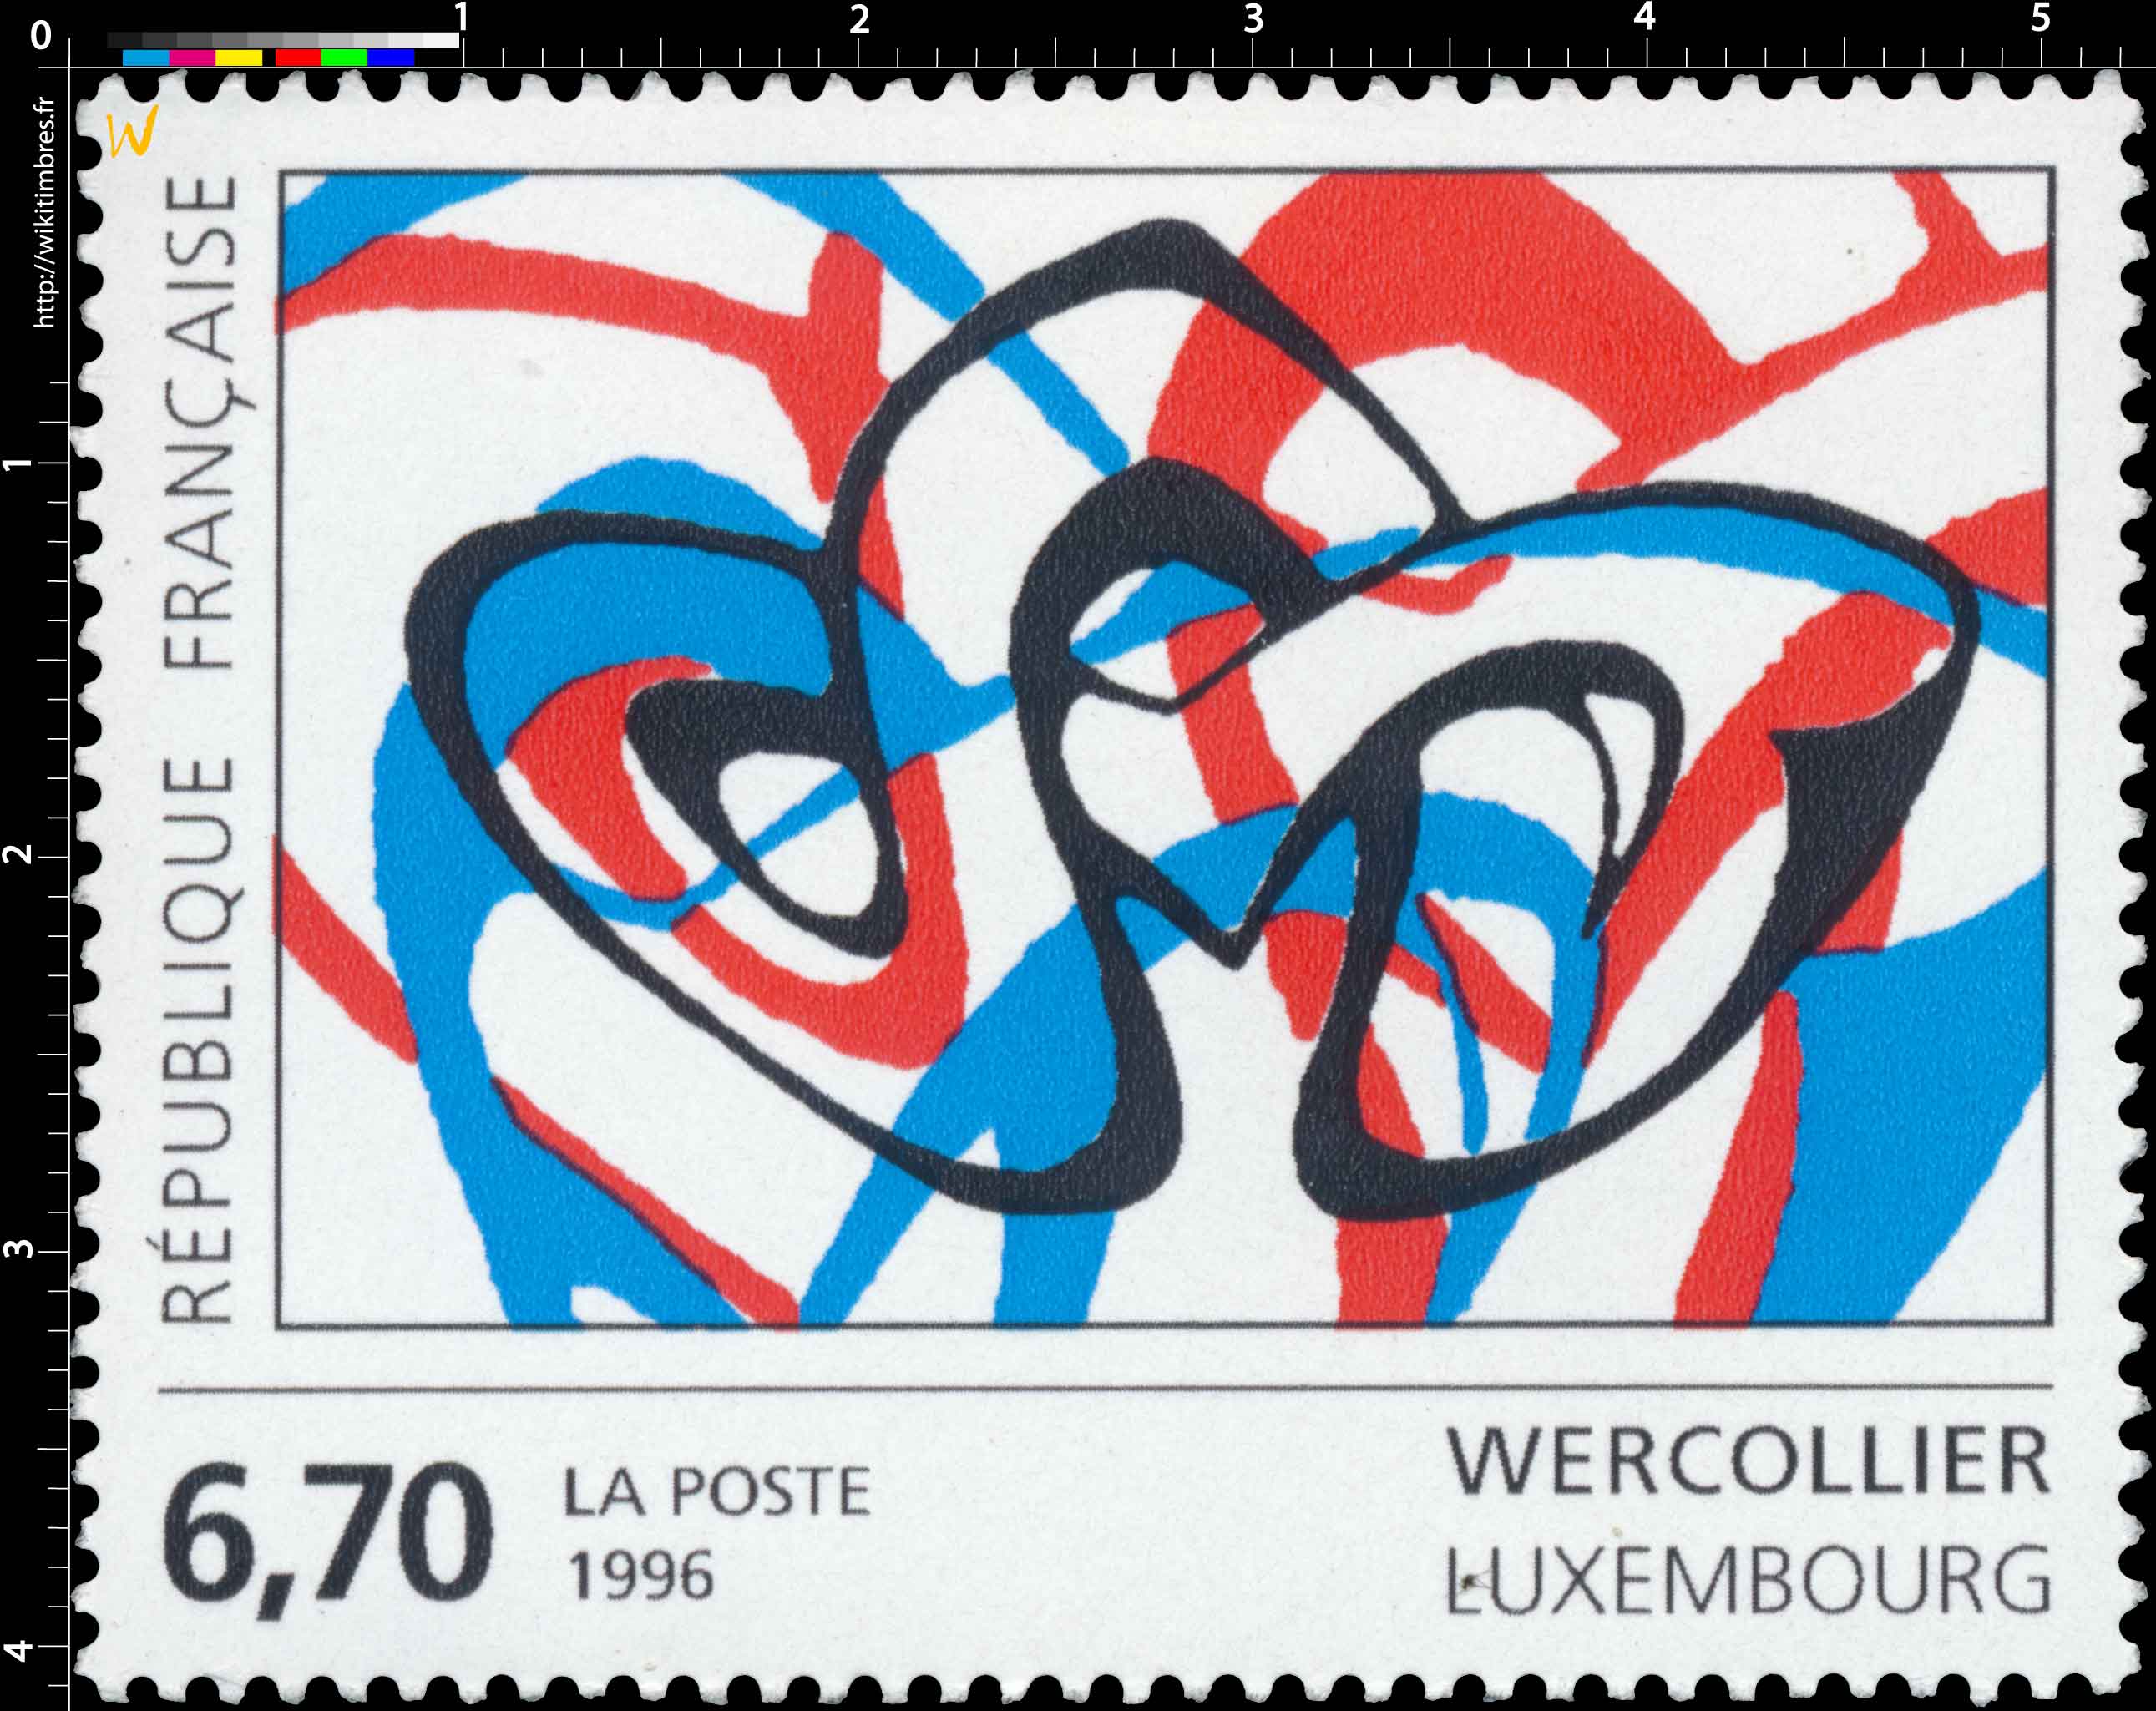 1996 WERCOLLIER Luxembourg